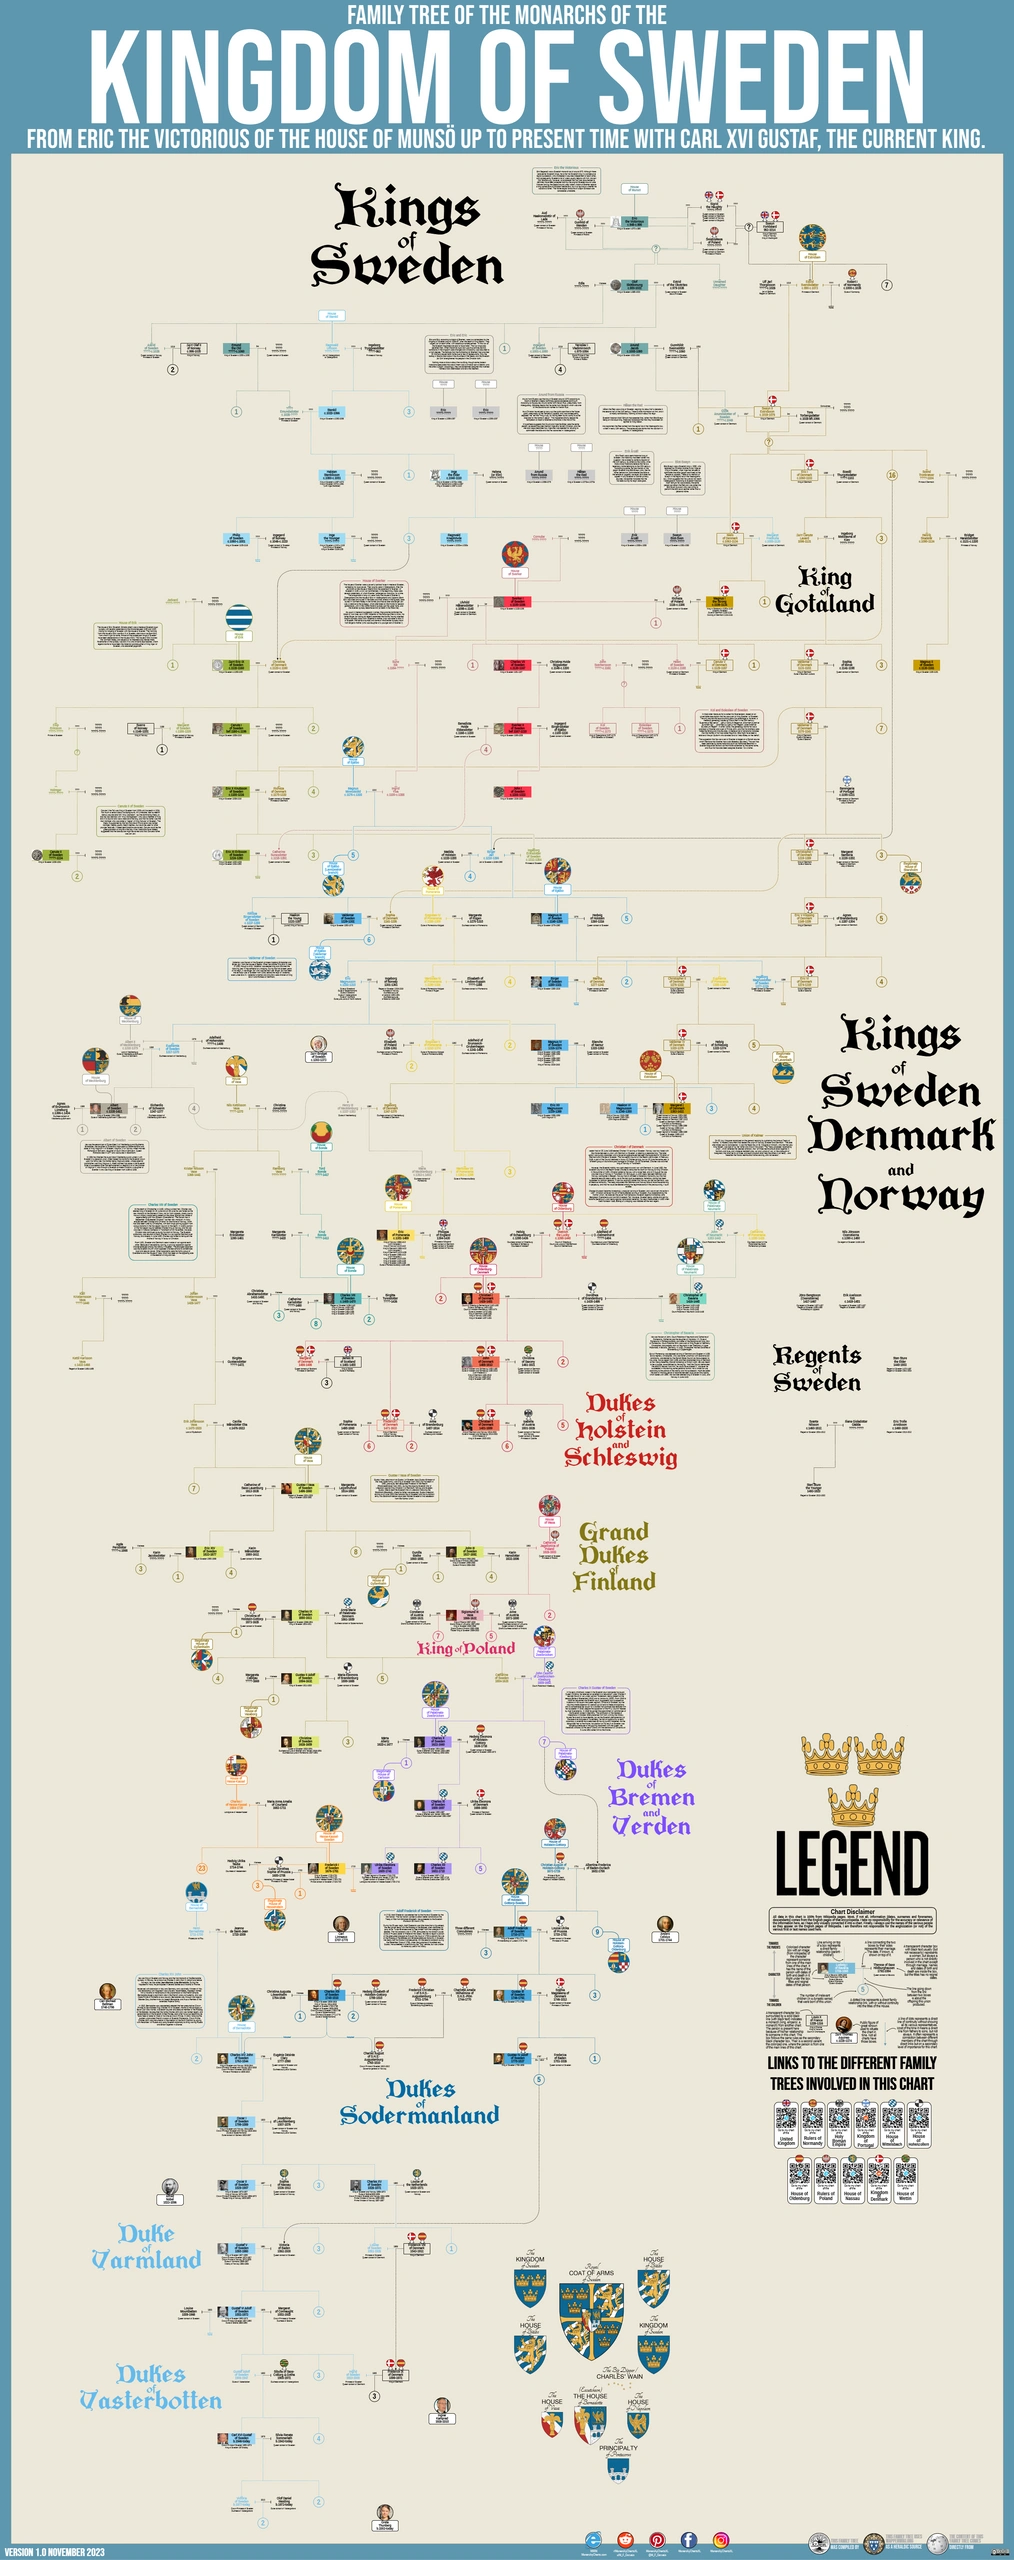 CHART, FAMILY TREE OF THE KINGDOM OF SWEDEN.